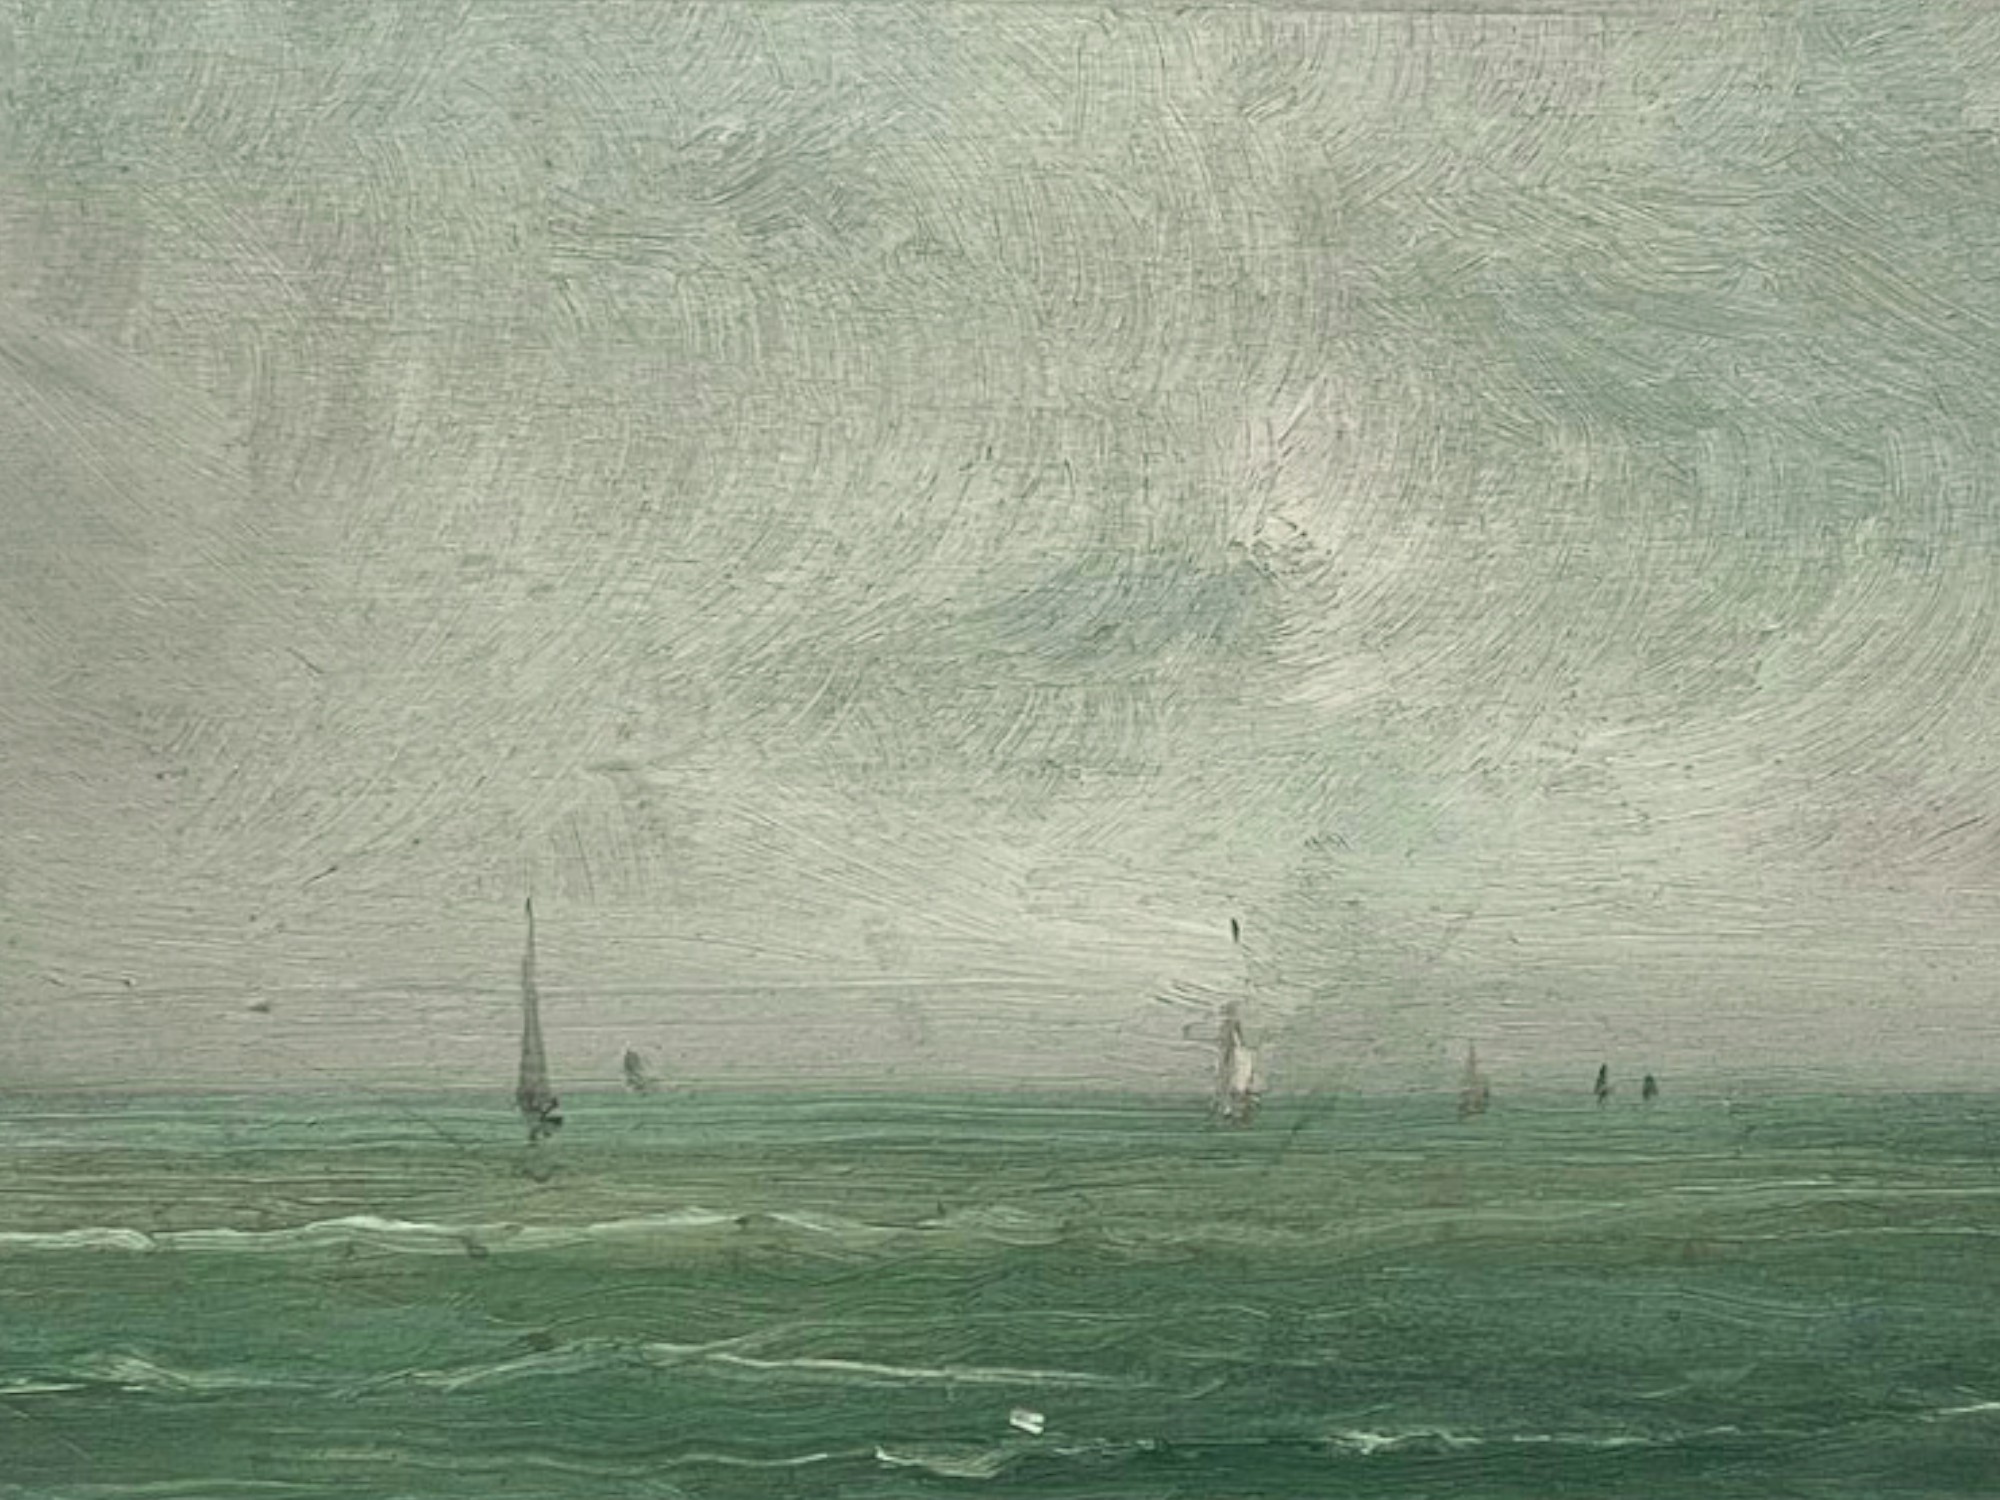 AMERICAN OIL PAINTING SEASCAPE BY JAMES WHISTLER PIC-1